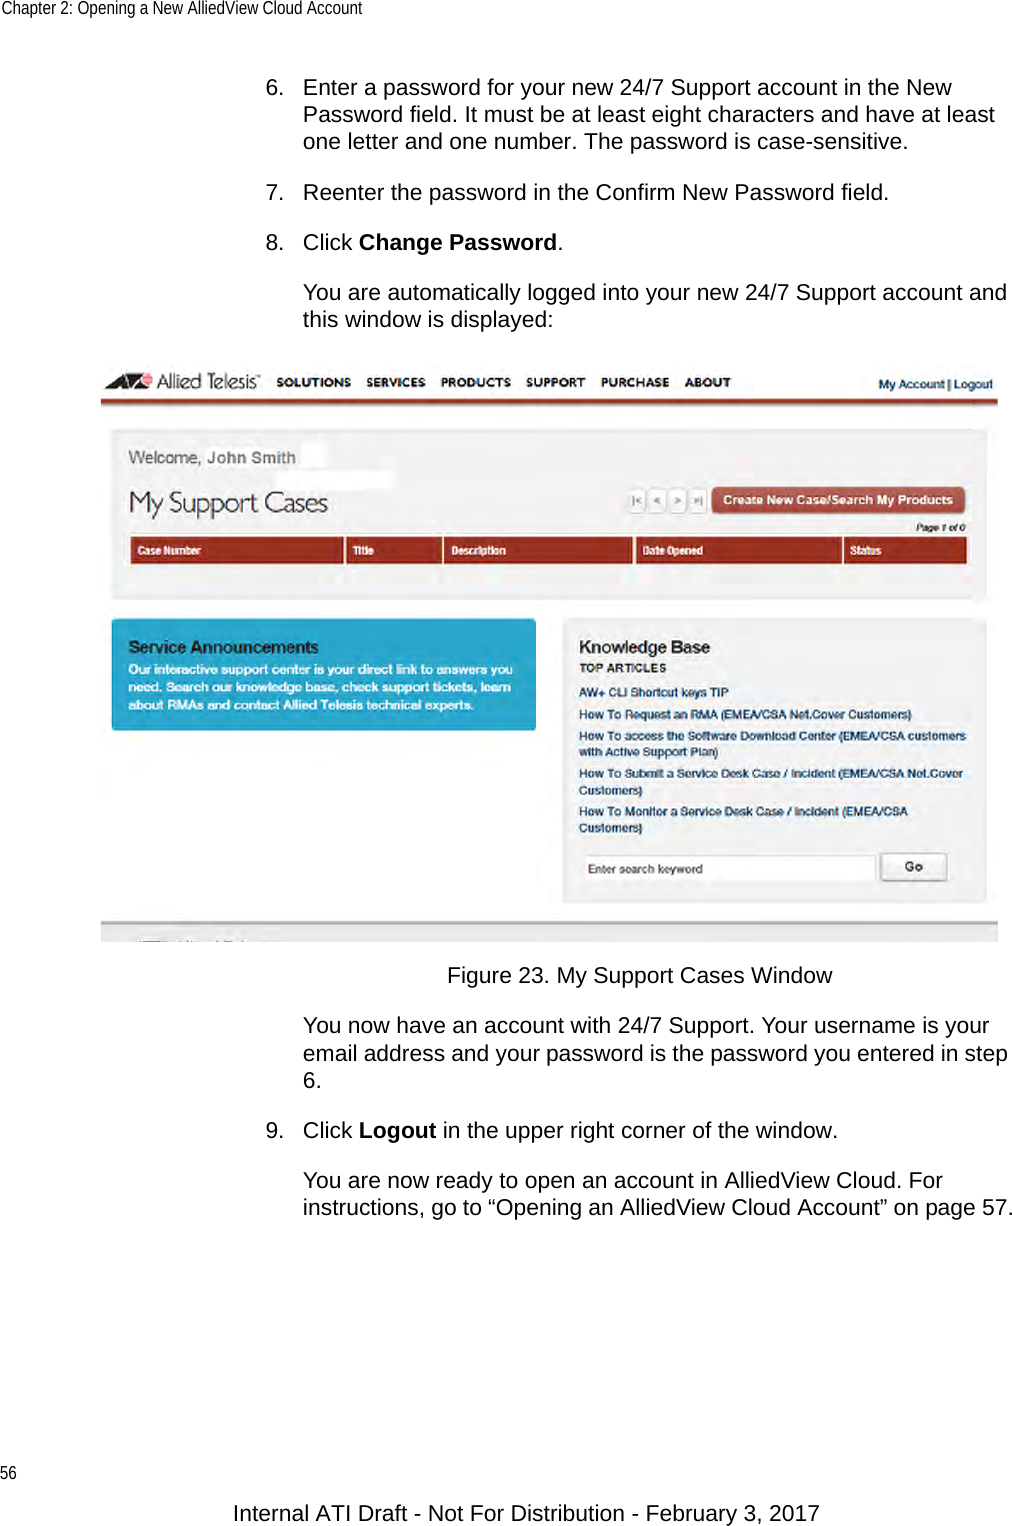 Chapter 2: Opening a New AlliedView Cloud Account566. Enter a password for your new 24/7 Support account in the New Password field. It must be at least eight characters and have at least one letter and one number. The password is case-sensitive.7. Reenter the password in the Confirm New Password field.8. Click Change Password.You are automatically logged into your new 24/7 Support account and this window is displayed:Figure 23. My Support Cases WindowYou now have an account with 24/7 Support. Your username is your email address and your password is the password you entered in step 6.9. Click Logout in the upper right corner of the window.You are now ready to open an account in AlliedView Cloud. For instructions, go to “Opening an AlliedView Cloud Account” on page 57.Internal ATI Draft - Not For Distribution - February 3, 2017